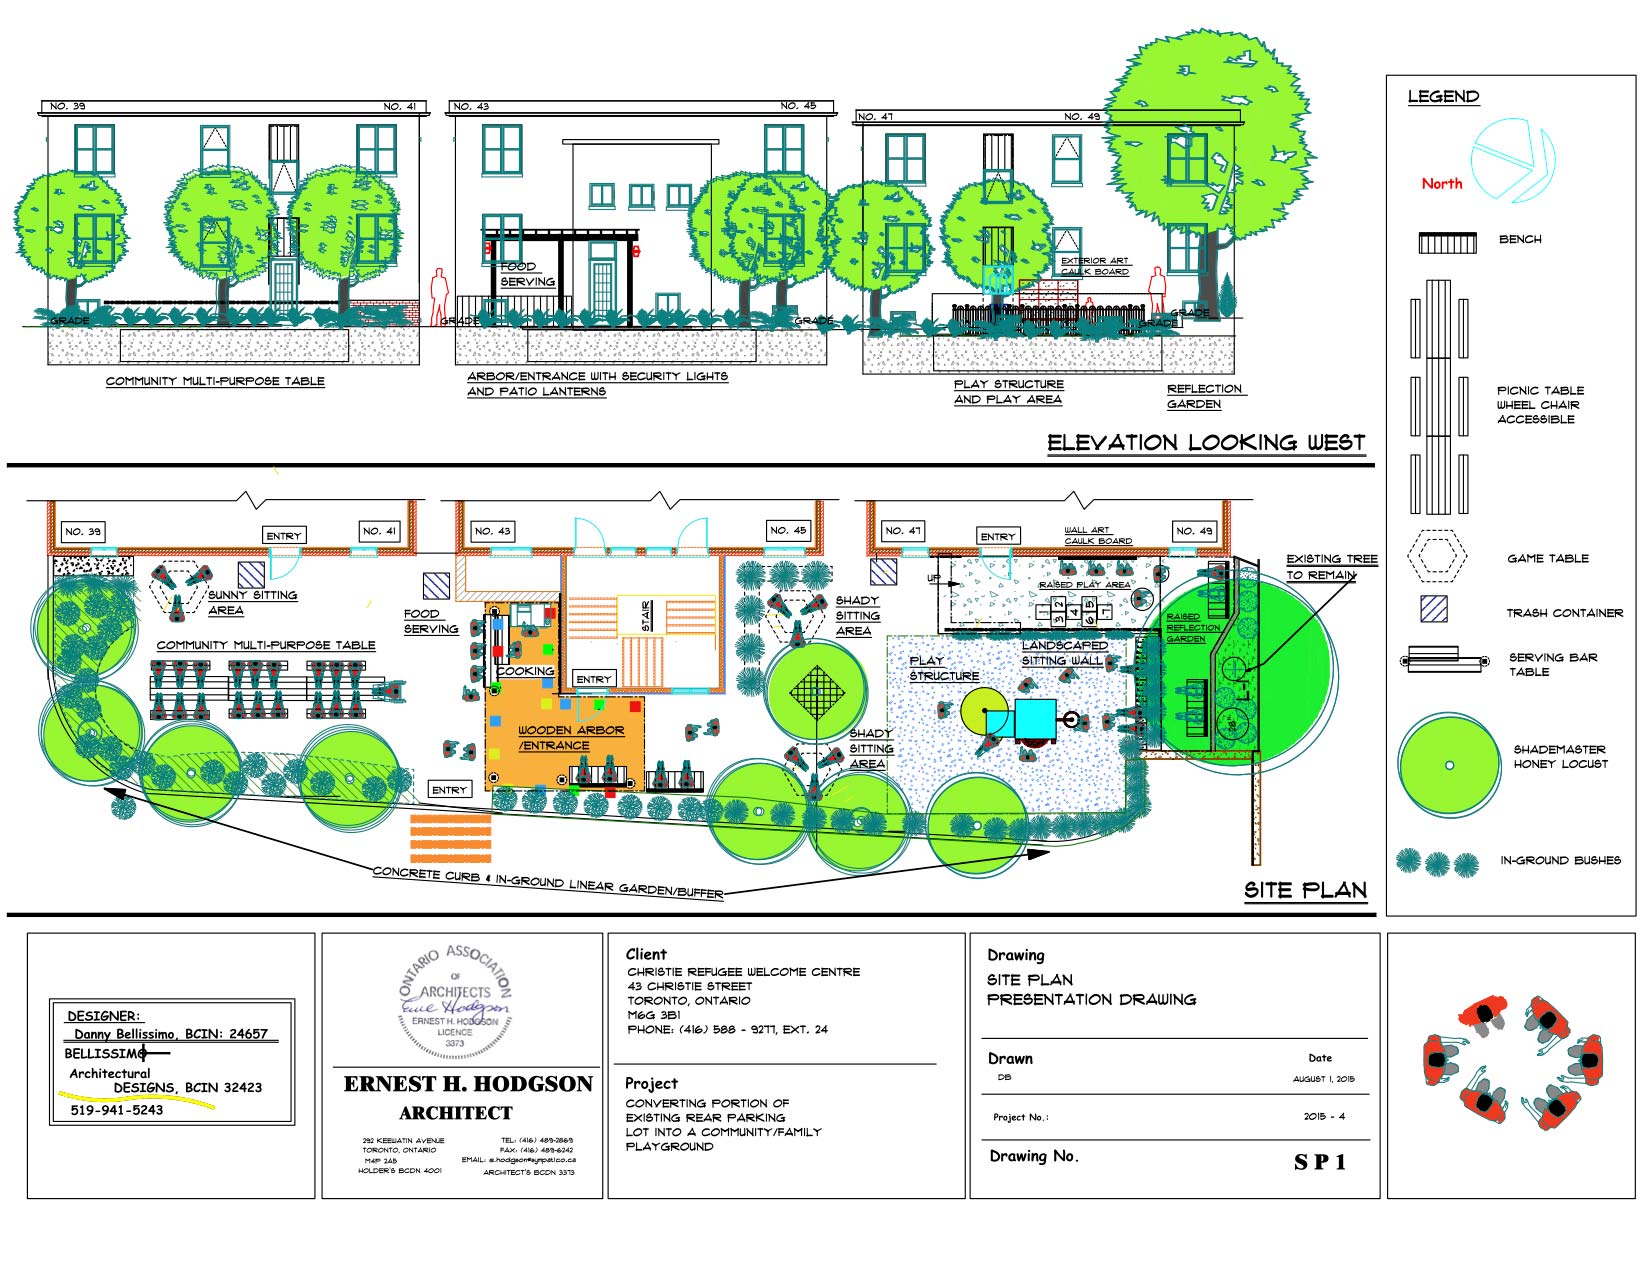 Architectural Drawing of Community Green Space